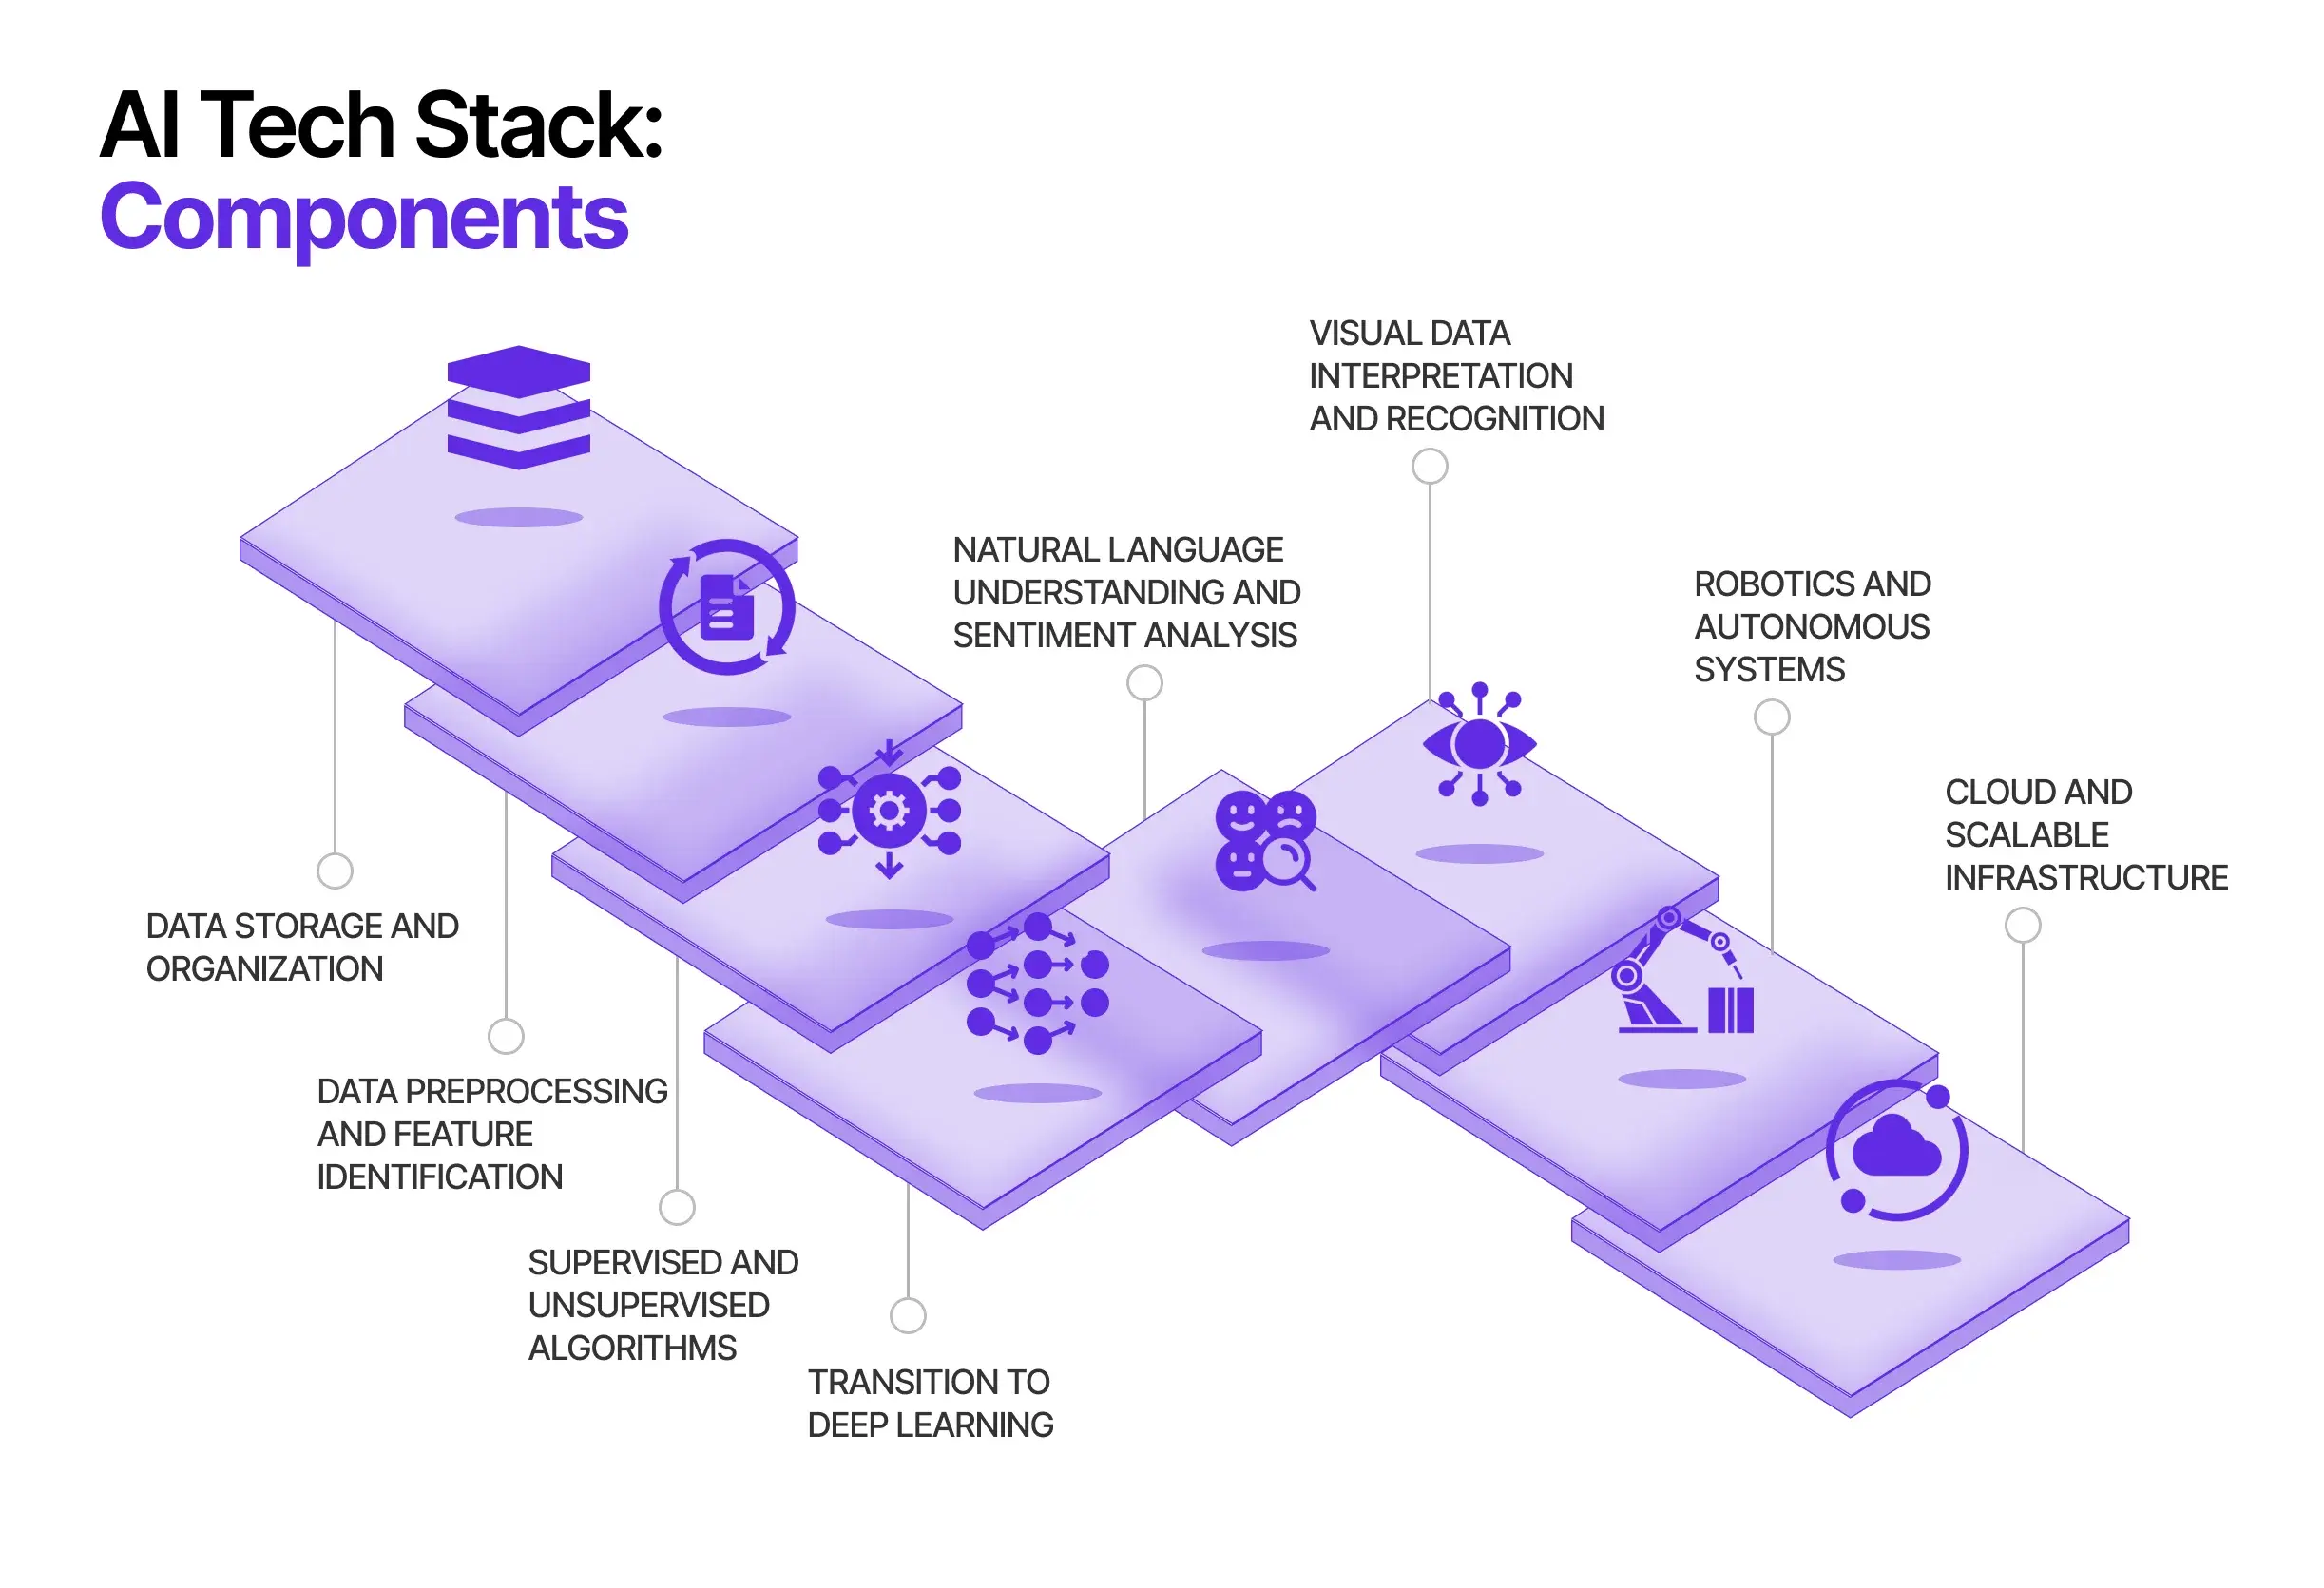 AI Tech Stack: Components & Their Relevance